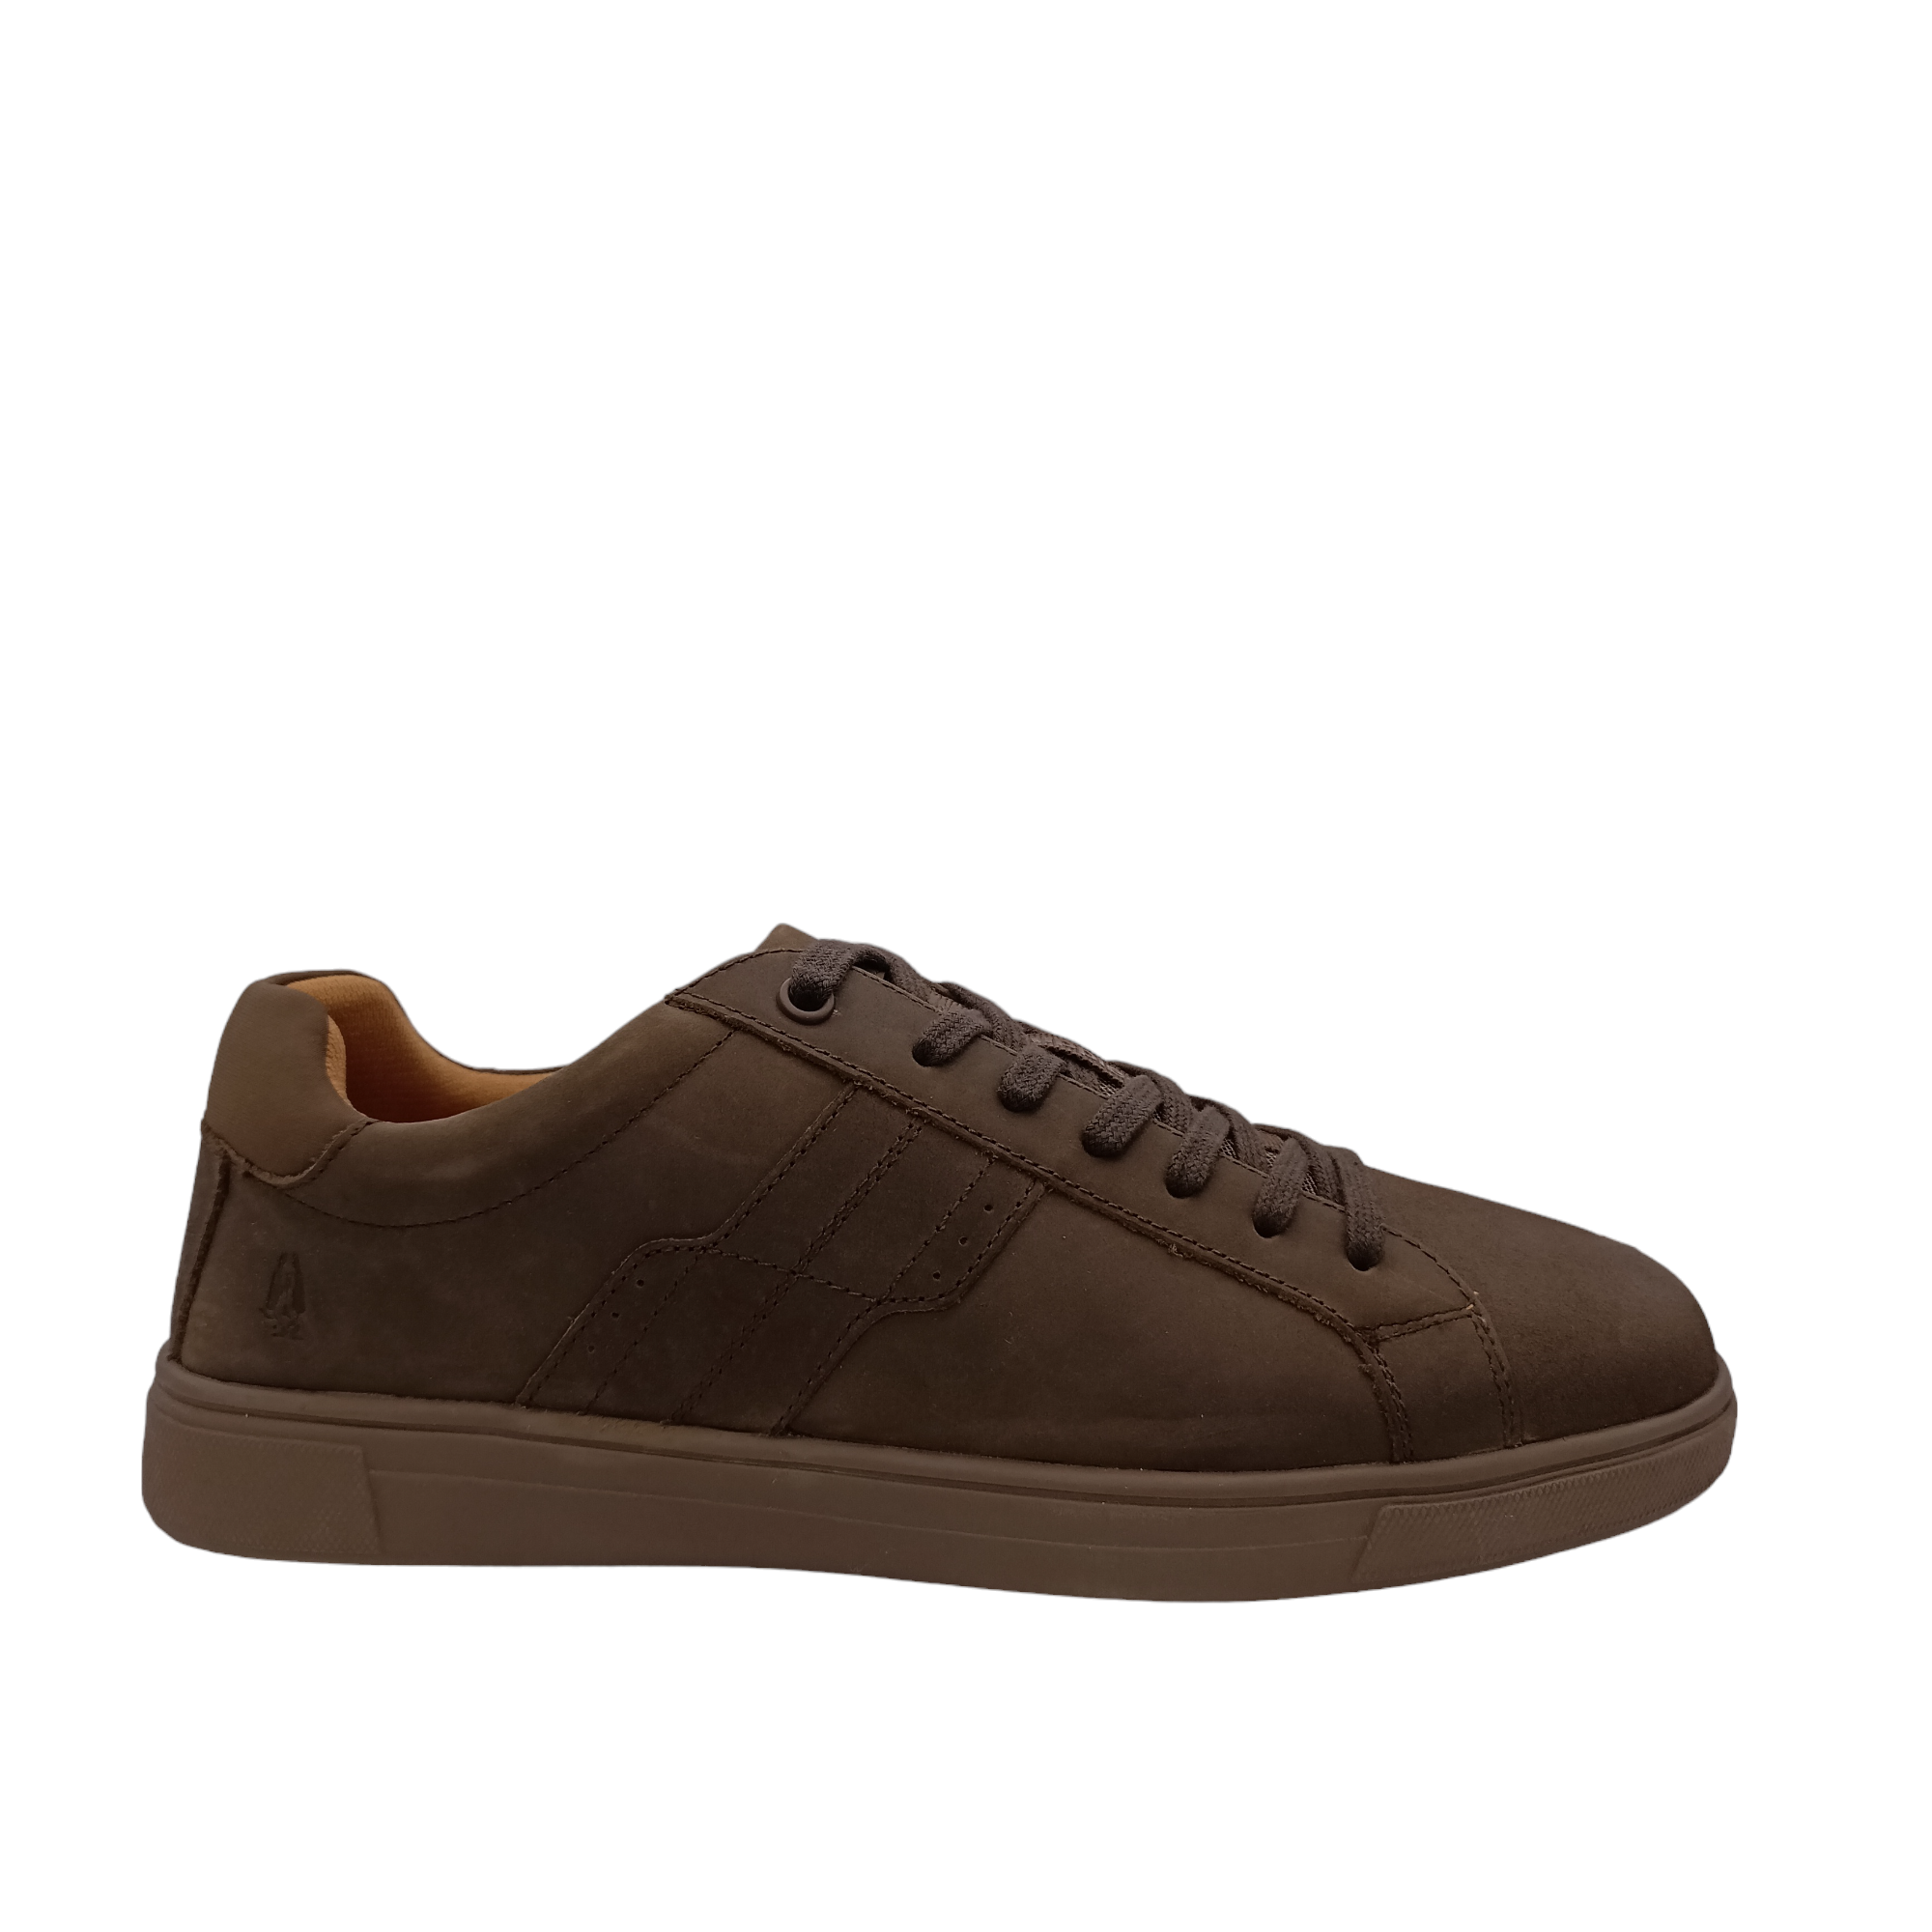 Gravity Leather from Hush Puppies. side angled view of brown oiled leather lace up shoe with dark brown flat laces. Lightening pattern from laces down to dark brown sole. Shop Online and In-store with shoe&amp;me Mount Maunganui